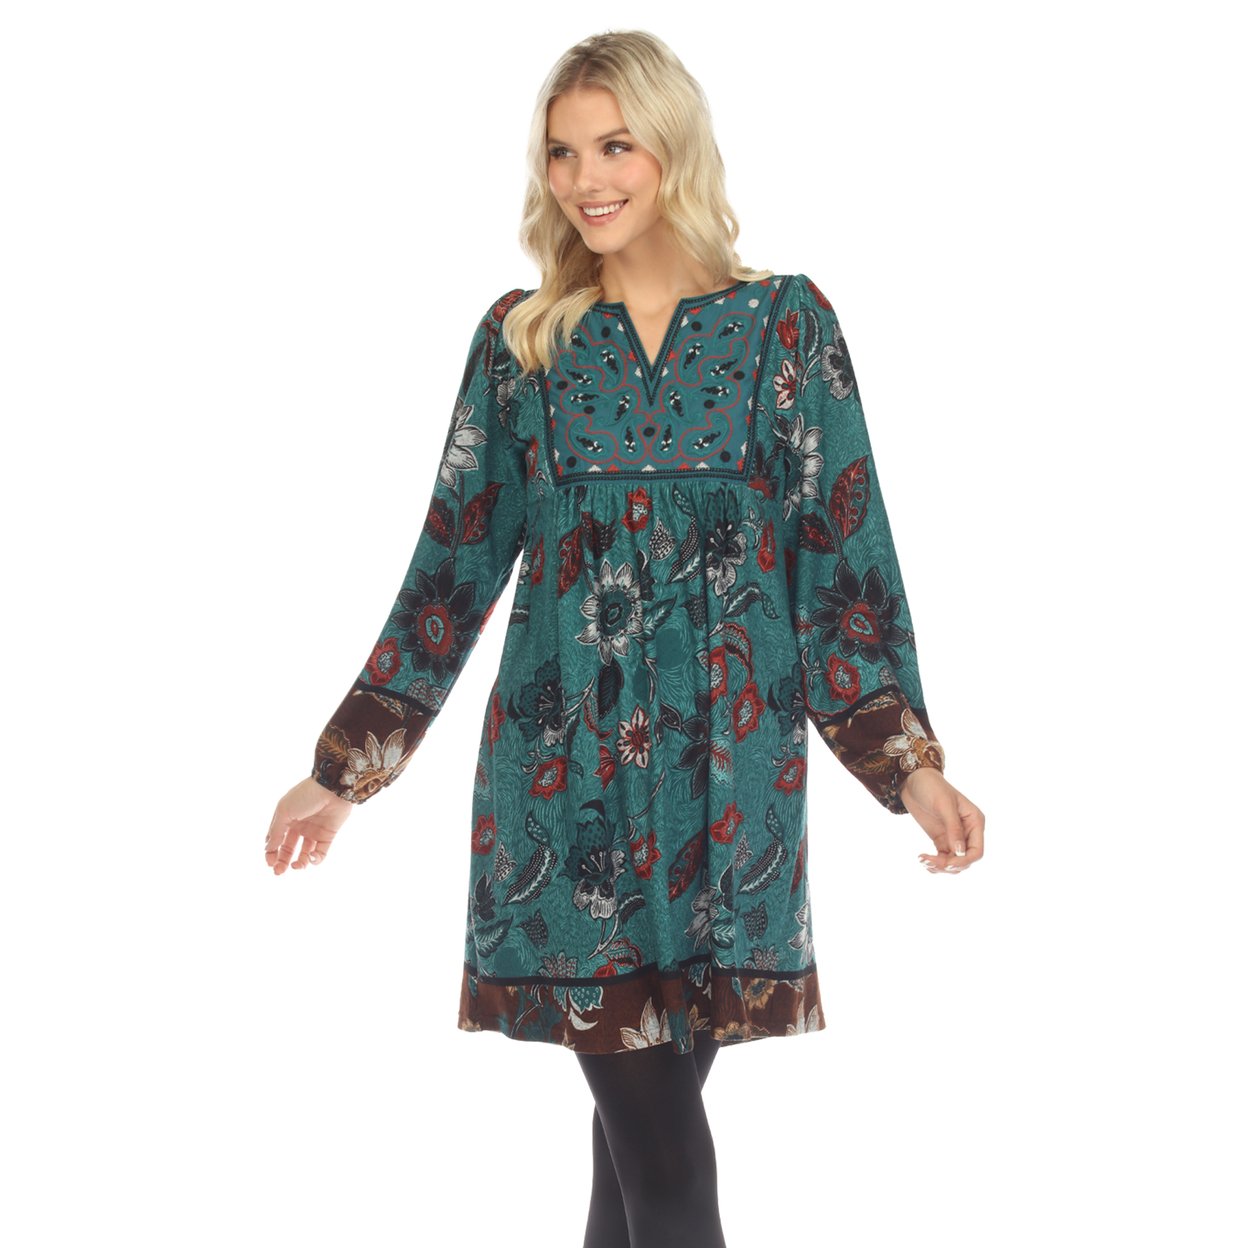 White Mark Women's Floral Paisley Sweater Dress - Teal, 2x